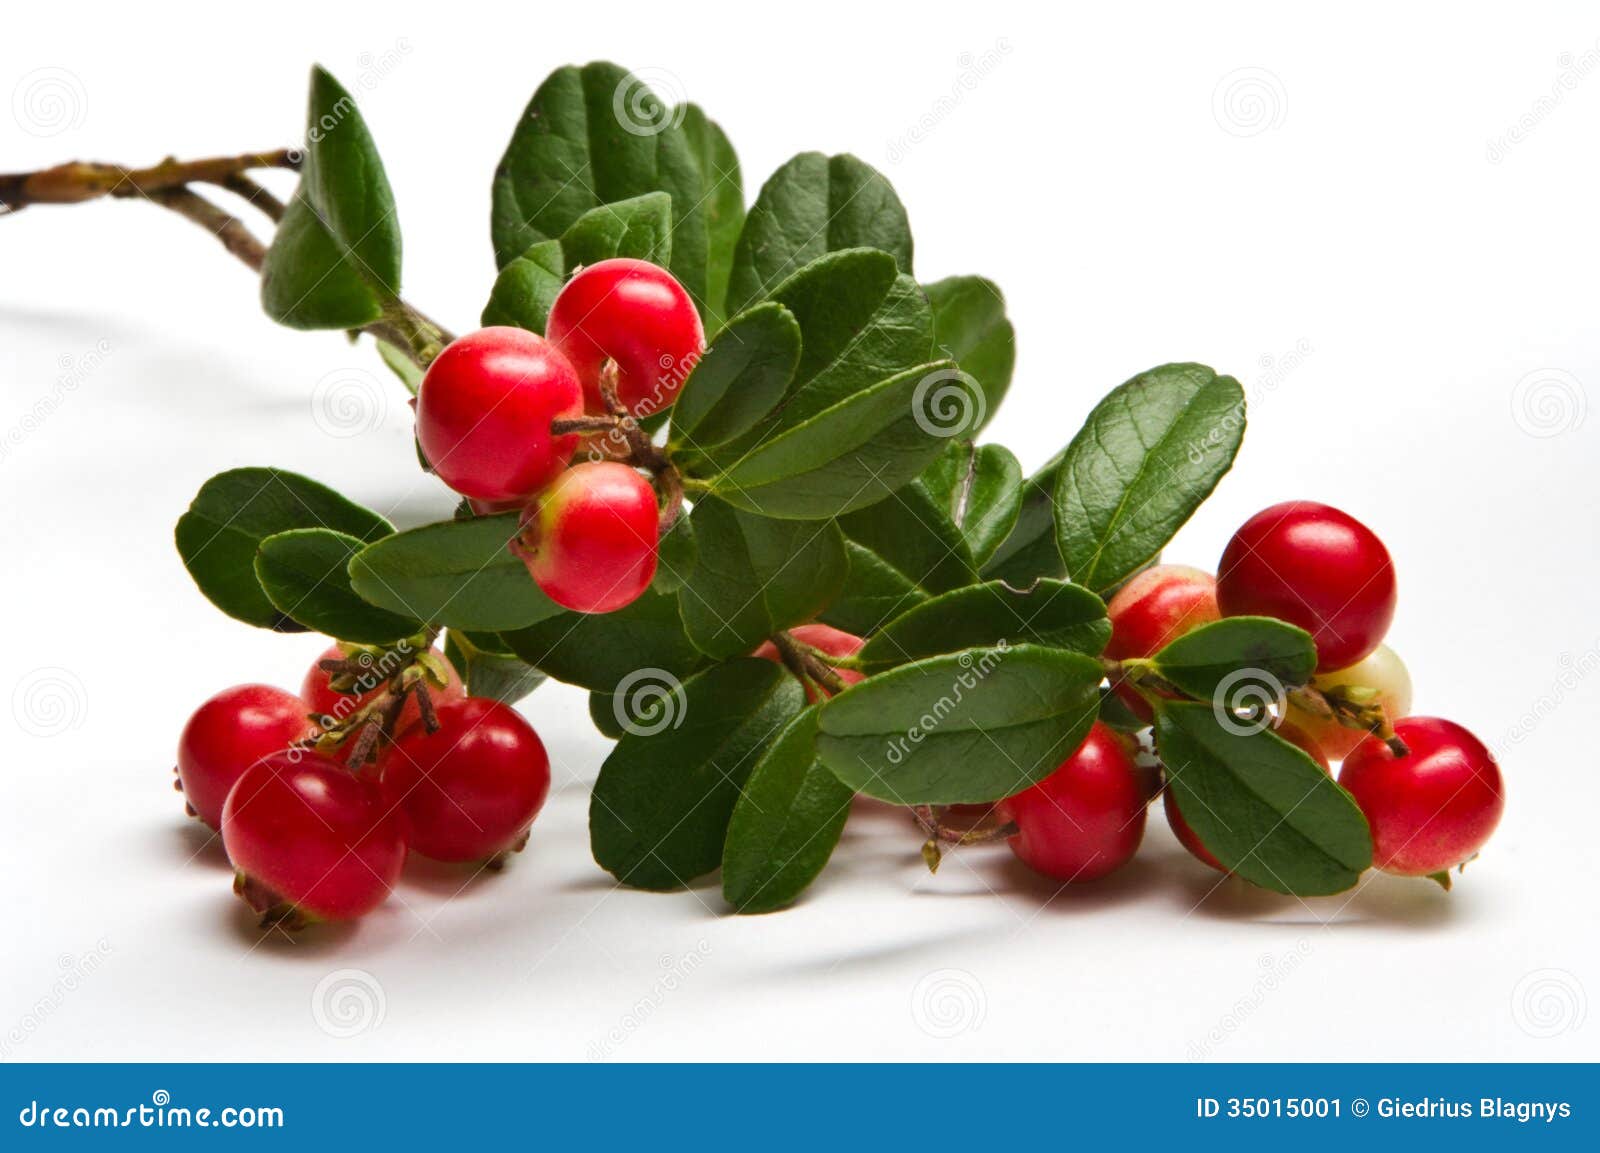 wild lingonberry (cowberry)